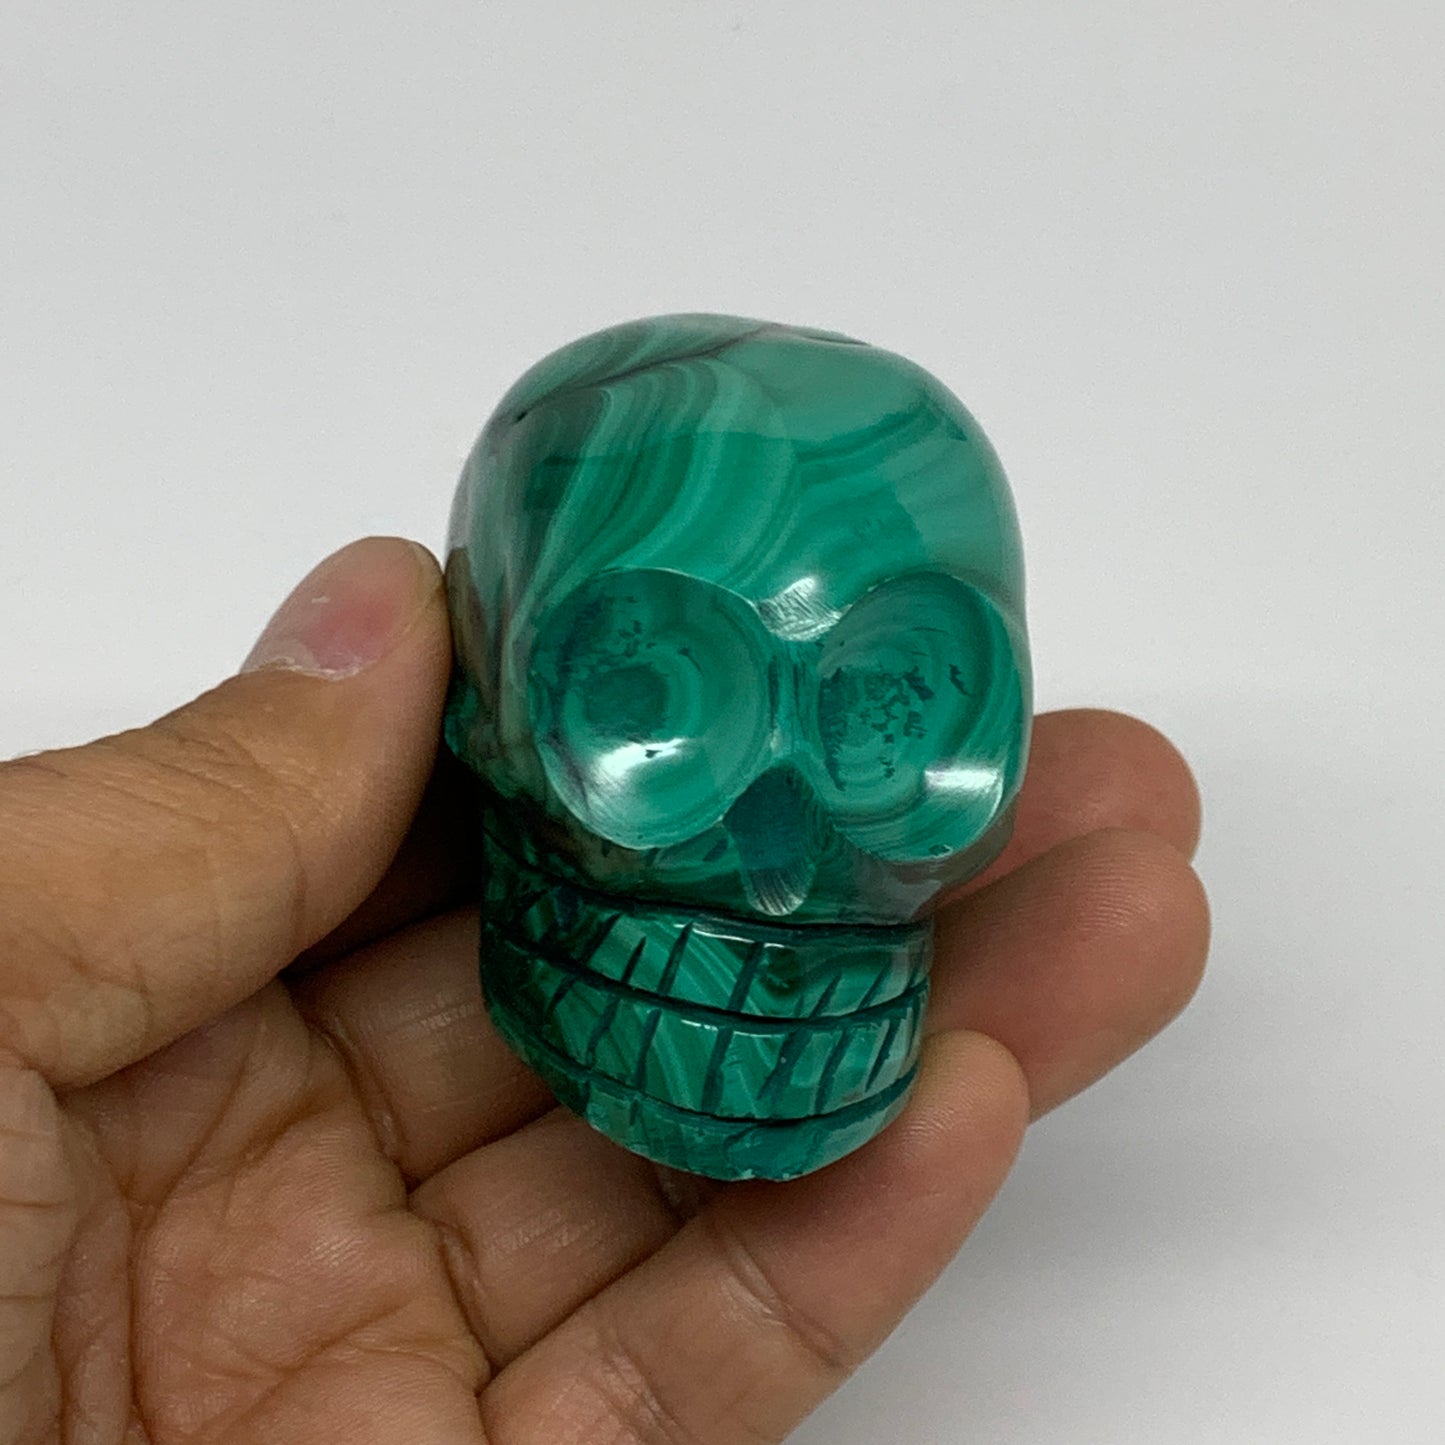 212.2g, 2.5"x1.4"x1.7", Natural Solid Malachite Skull From Congo, B32721